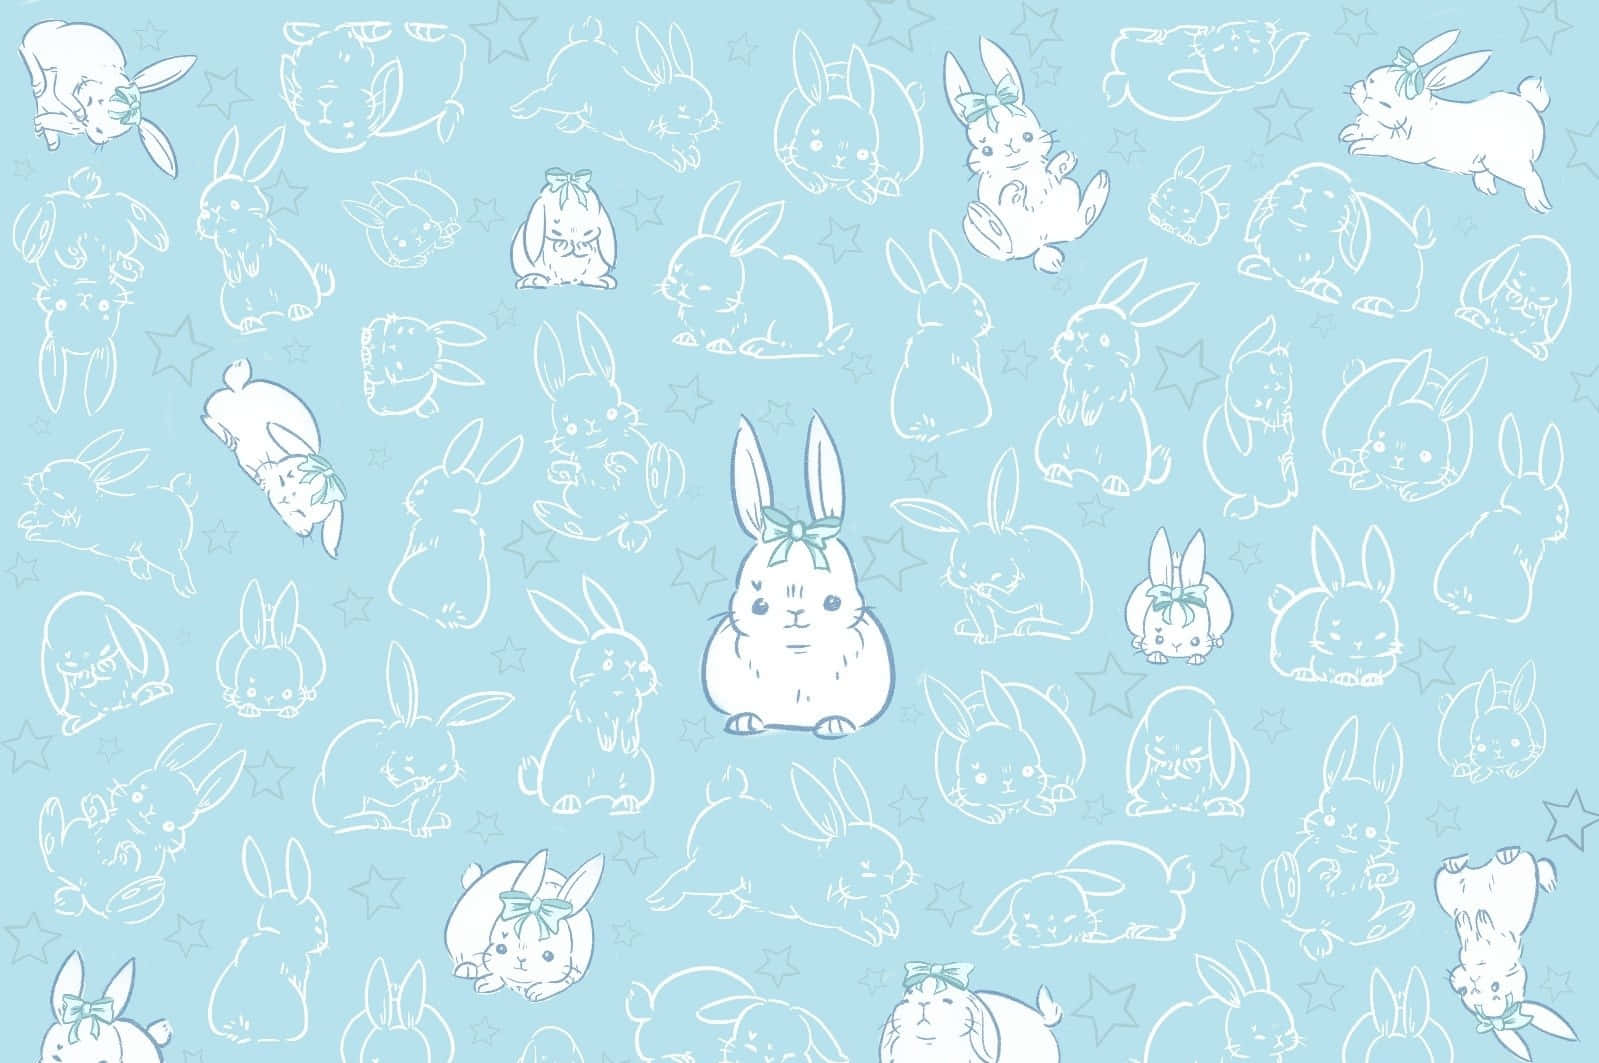 Embrace the cuteness of pastel colors with this adorable Kawaii Pastel Laptop. Wallpaper